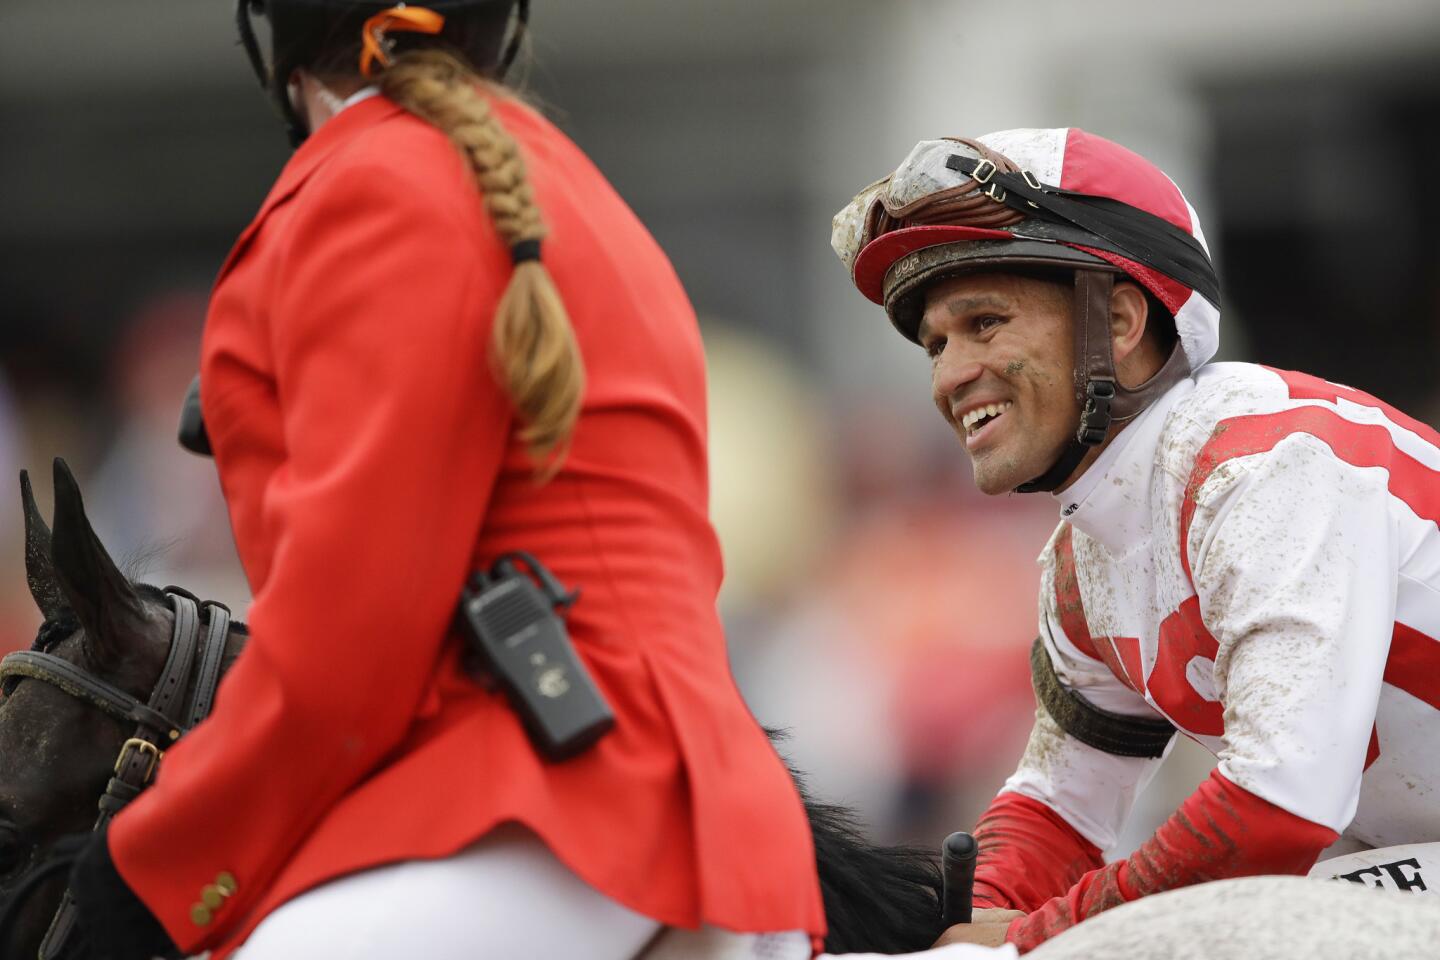 Javier Castellano won his second Preakness Stakes by guiding 13-1 shot Cloud Computing to victory Saturday at Pimlico Race Course.